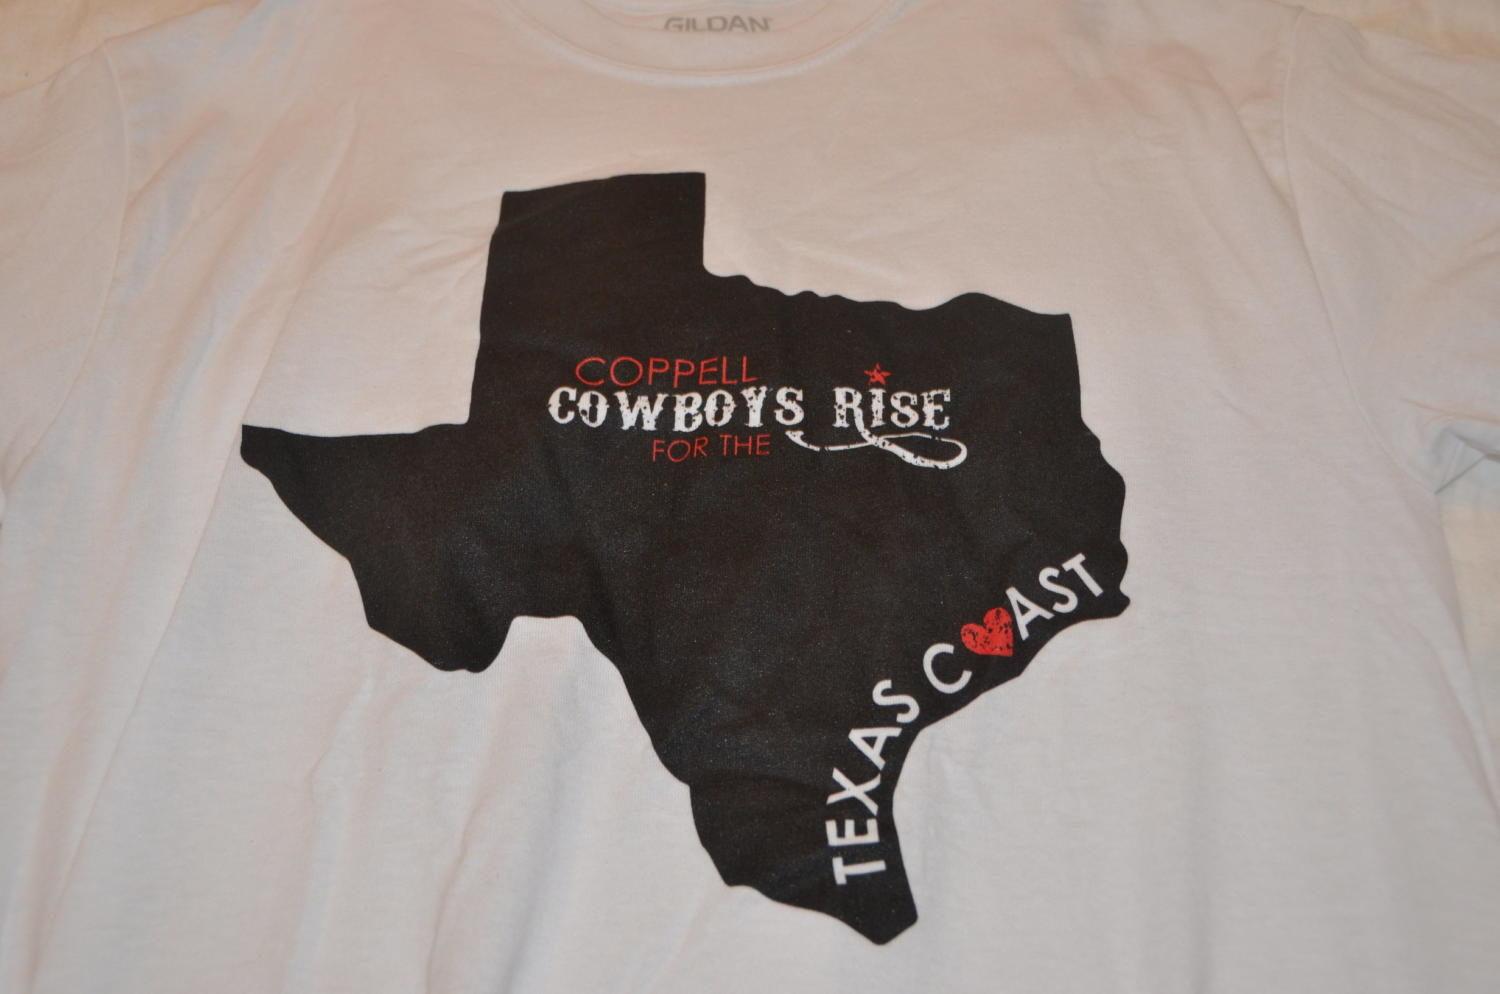 Coppell+High+School+is+selling+T-shirts+for+%2410+near+the+horseshoe+to+battle+the+damages+caused+by+Hurricane+Harvey+in+Texas.+All+profit+is+for+charities+for+the+benefit+of+those+affected+by+the+hurricane.